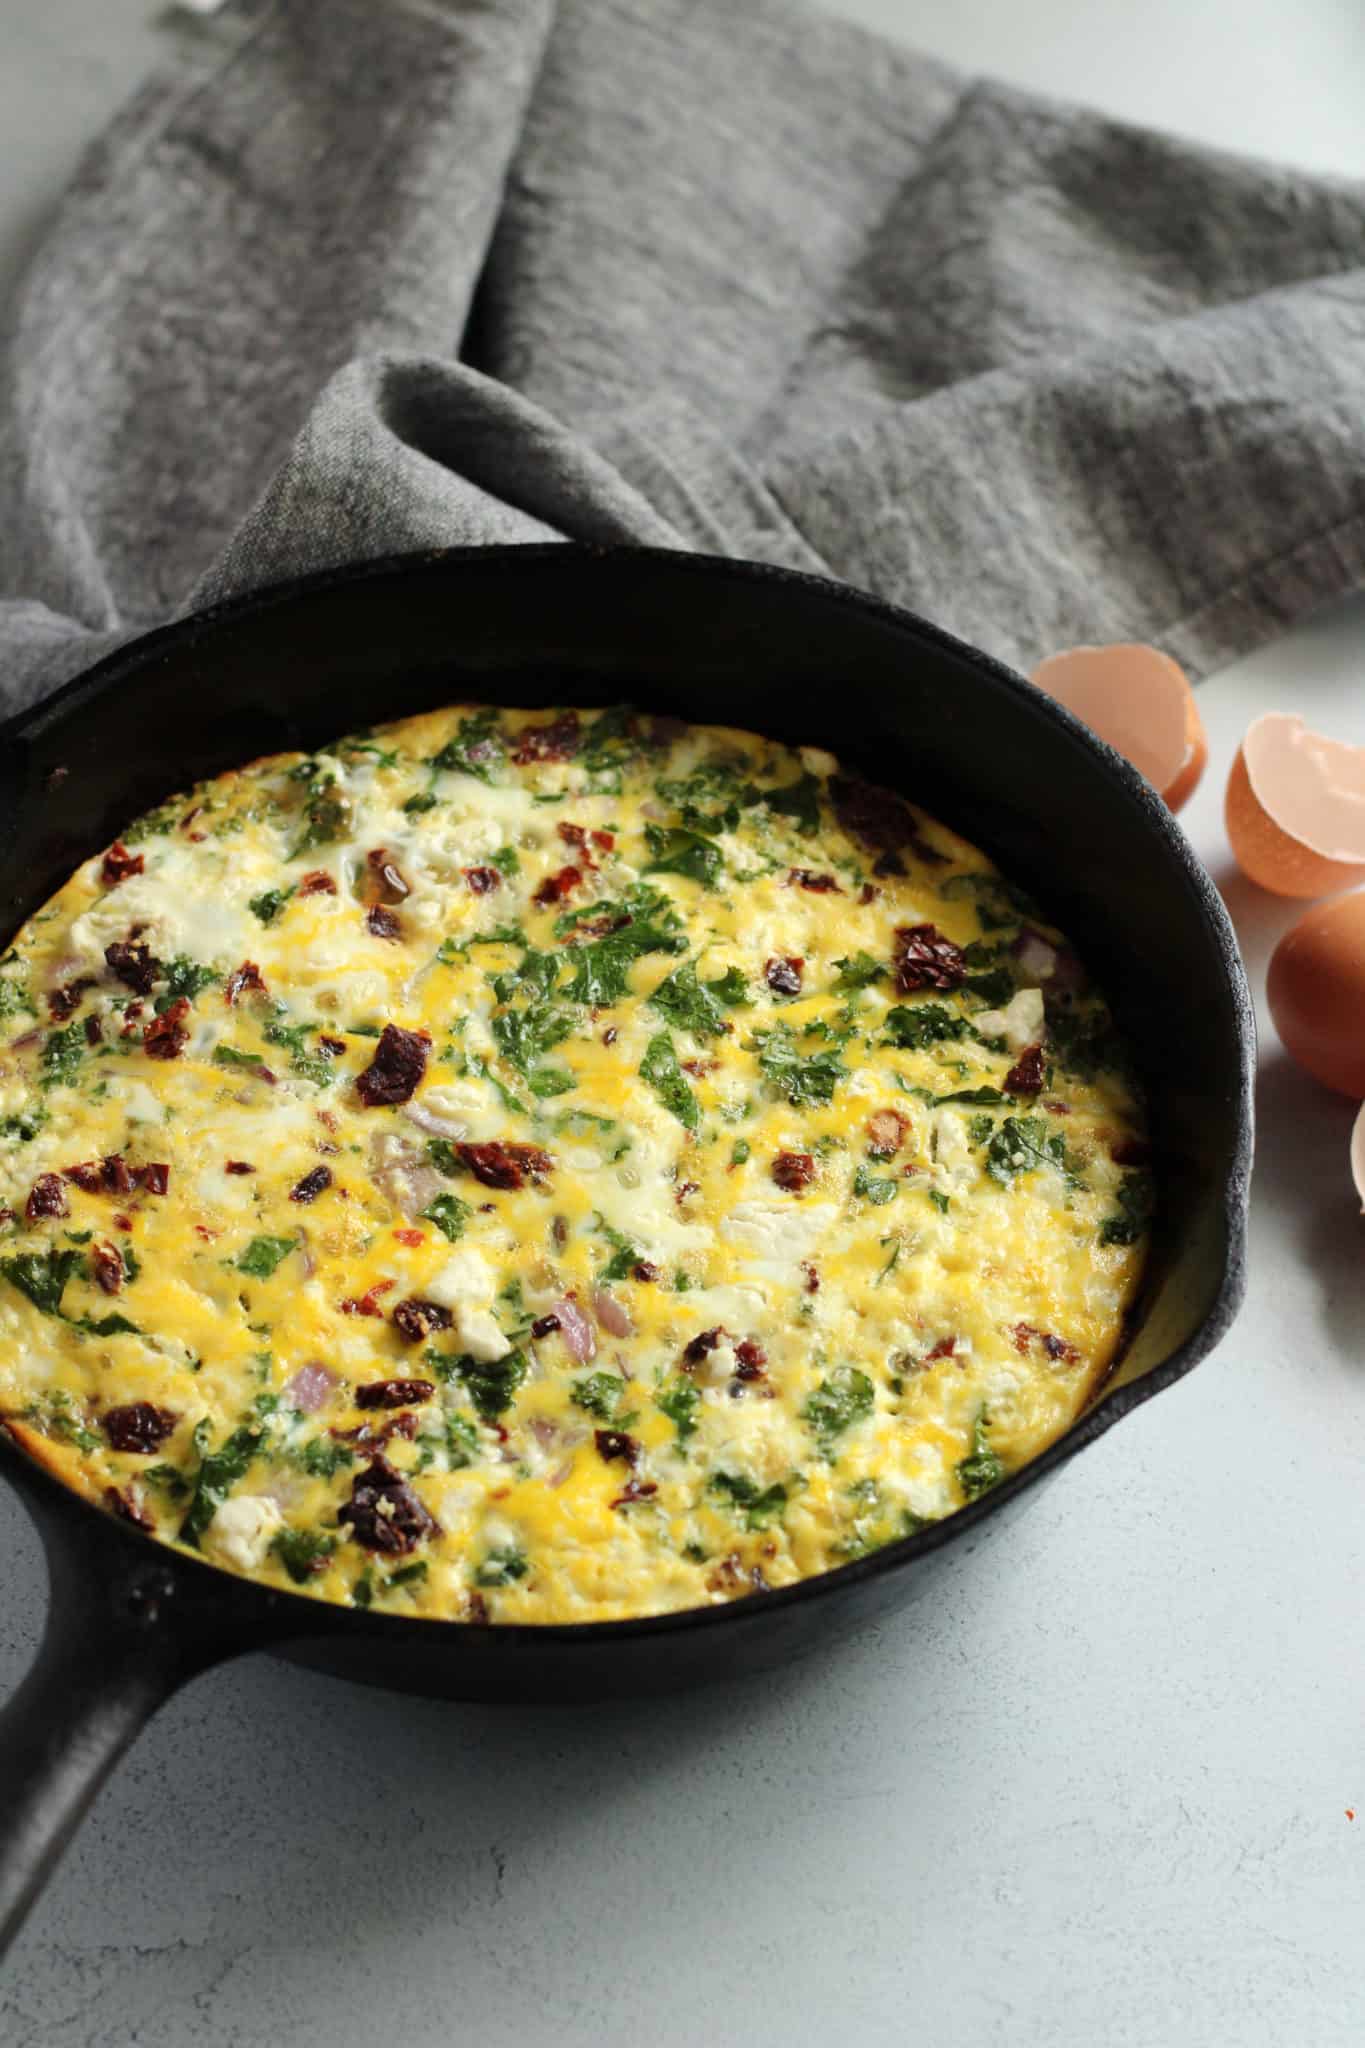 This Sun-Dried Tomato & Kale Frittata is a nutrition-packed breakfast that stores well as leftovers. Prep your breakfast for the week to start each day with fuel and flavor